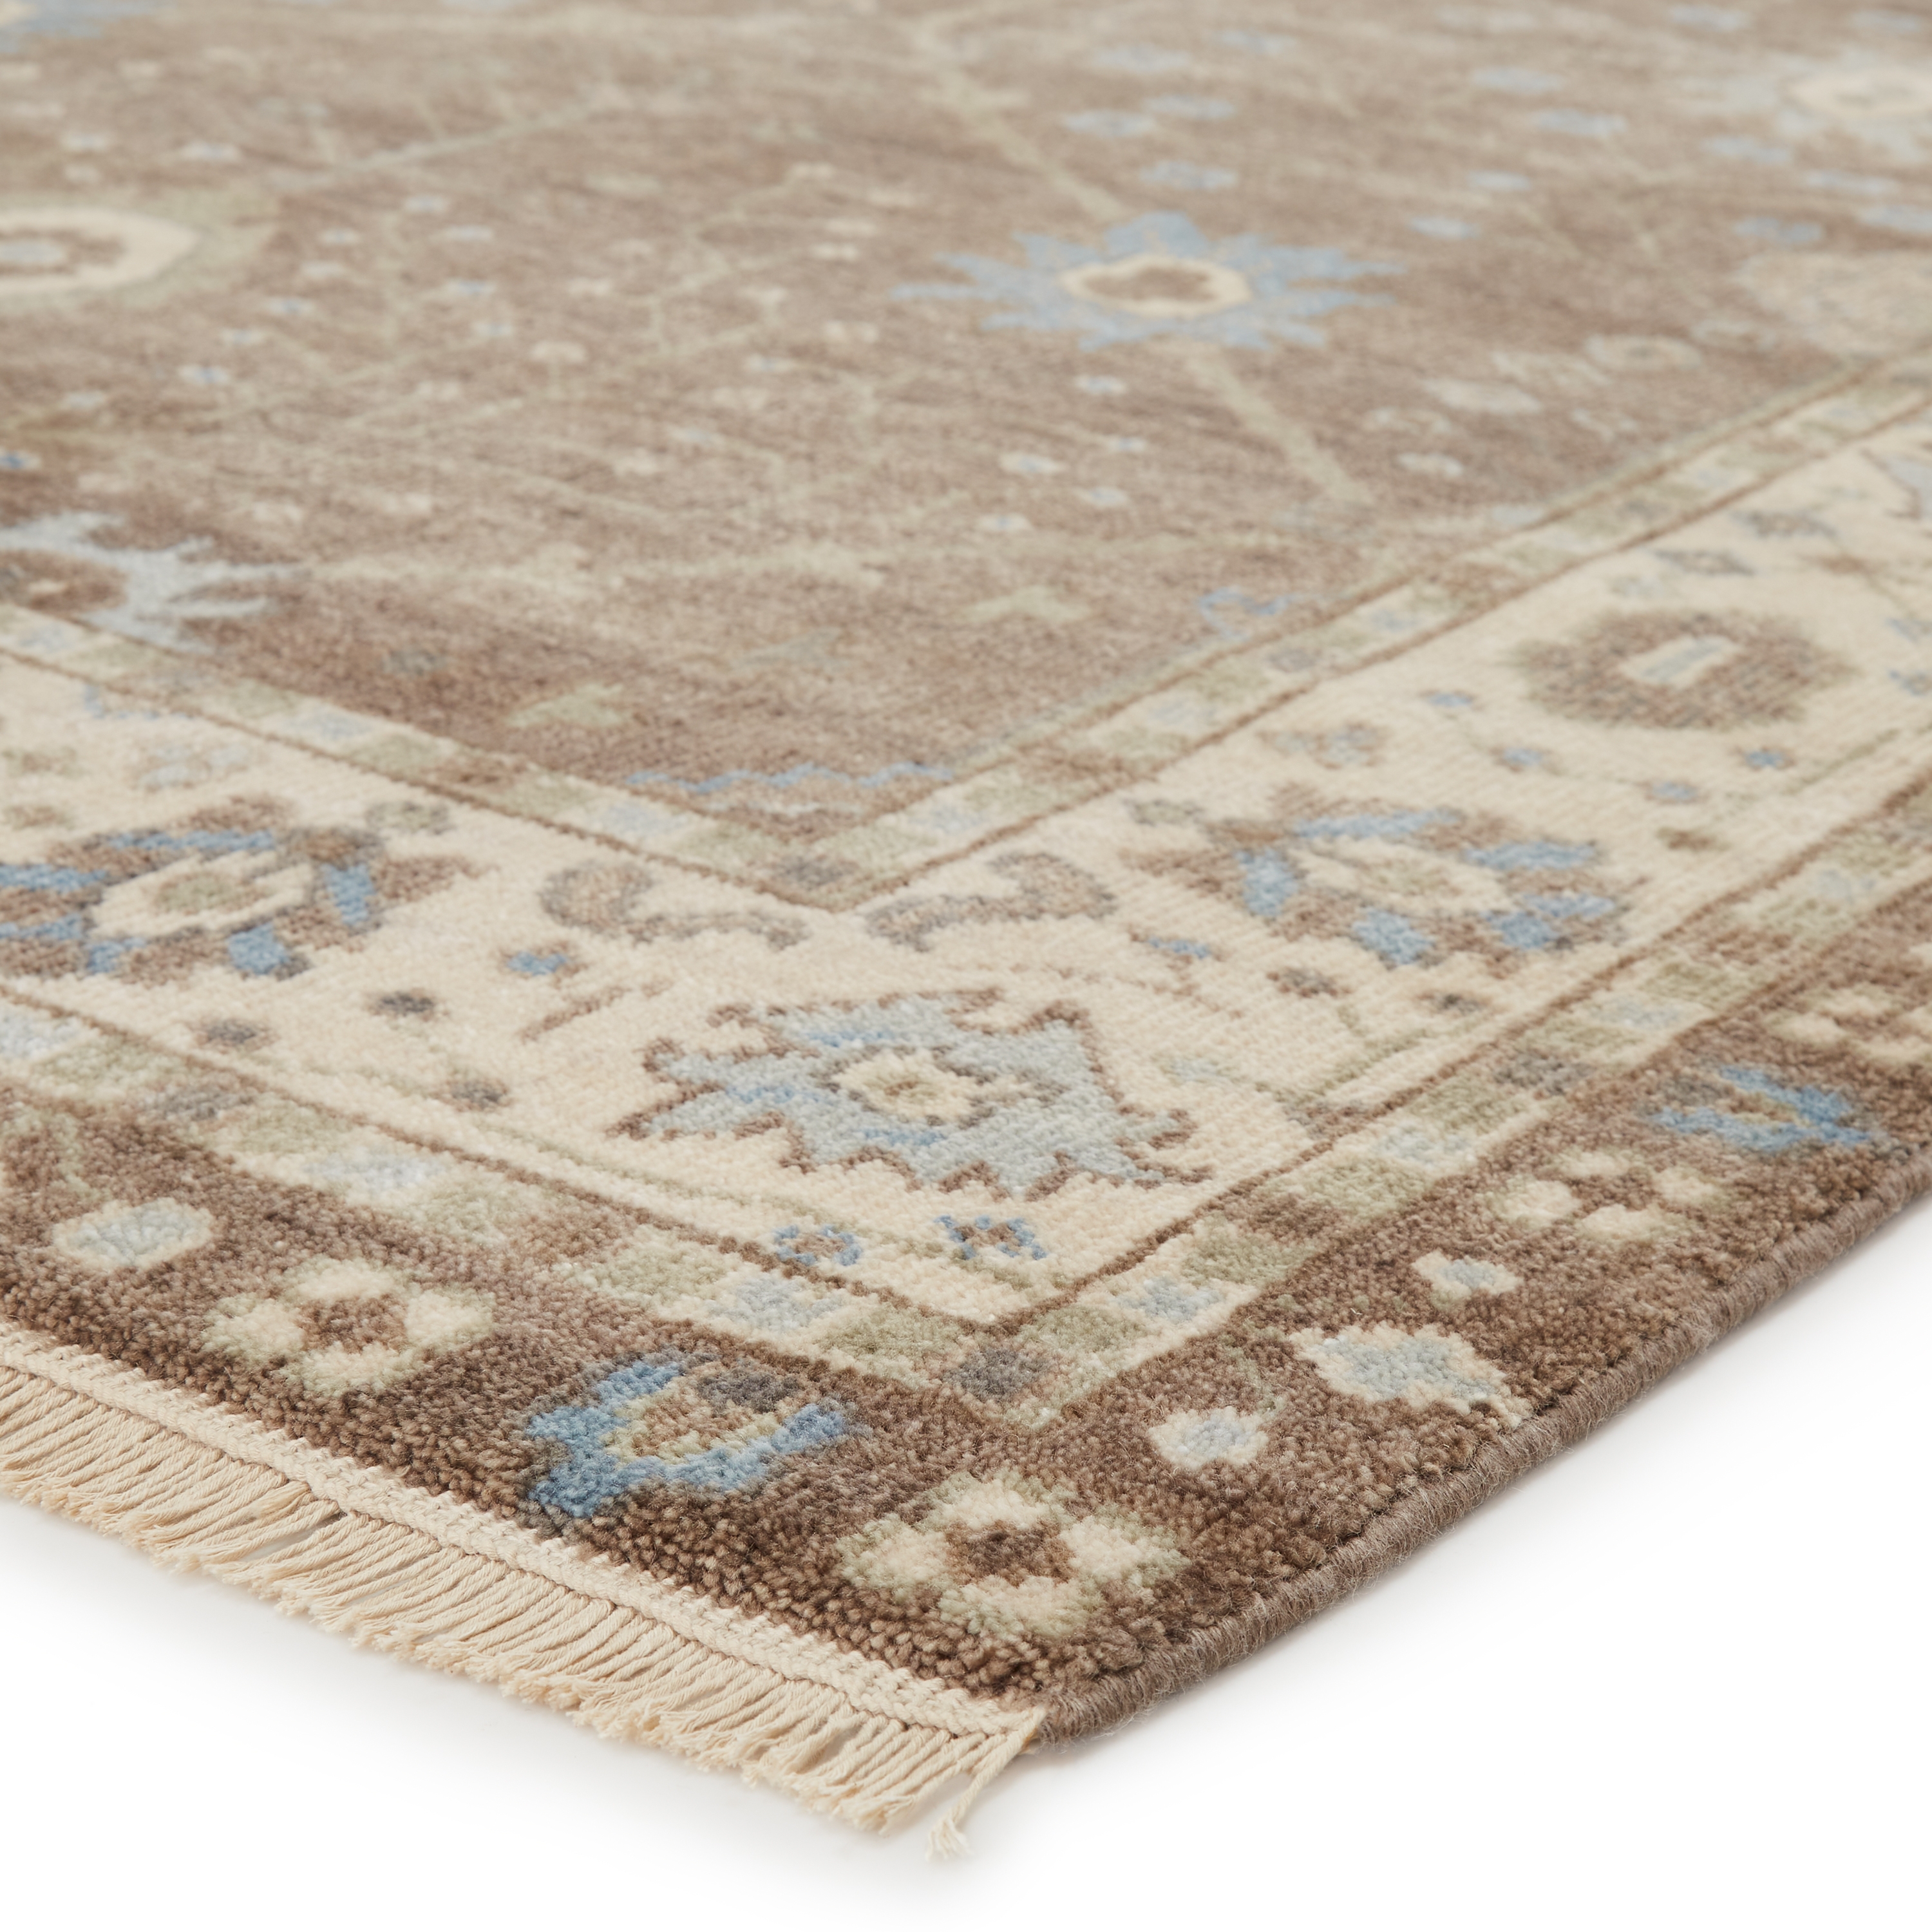 Princeton Hand-Knotted Floral Tan/ Light Blue Area Rug (2'X3') - Image 1